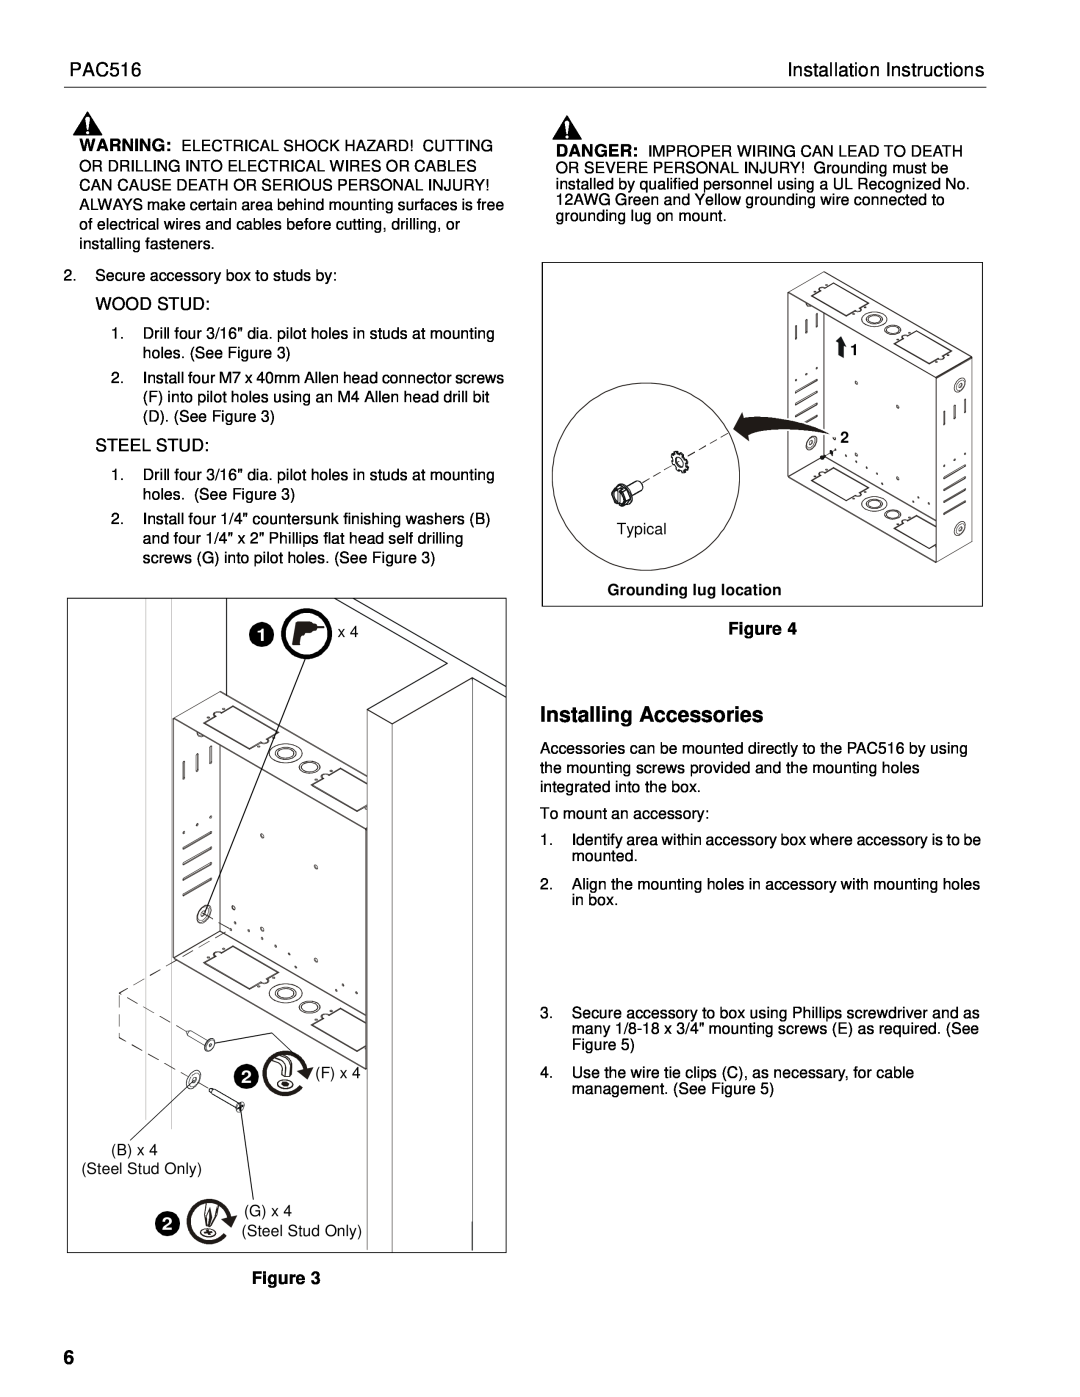 Chief Manufacturing PAC516 Installing Accessories, Wood Stud, Steel Stud, Installation Instructions 